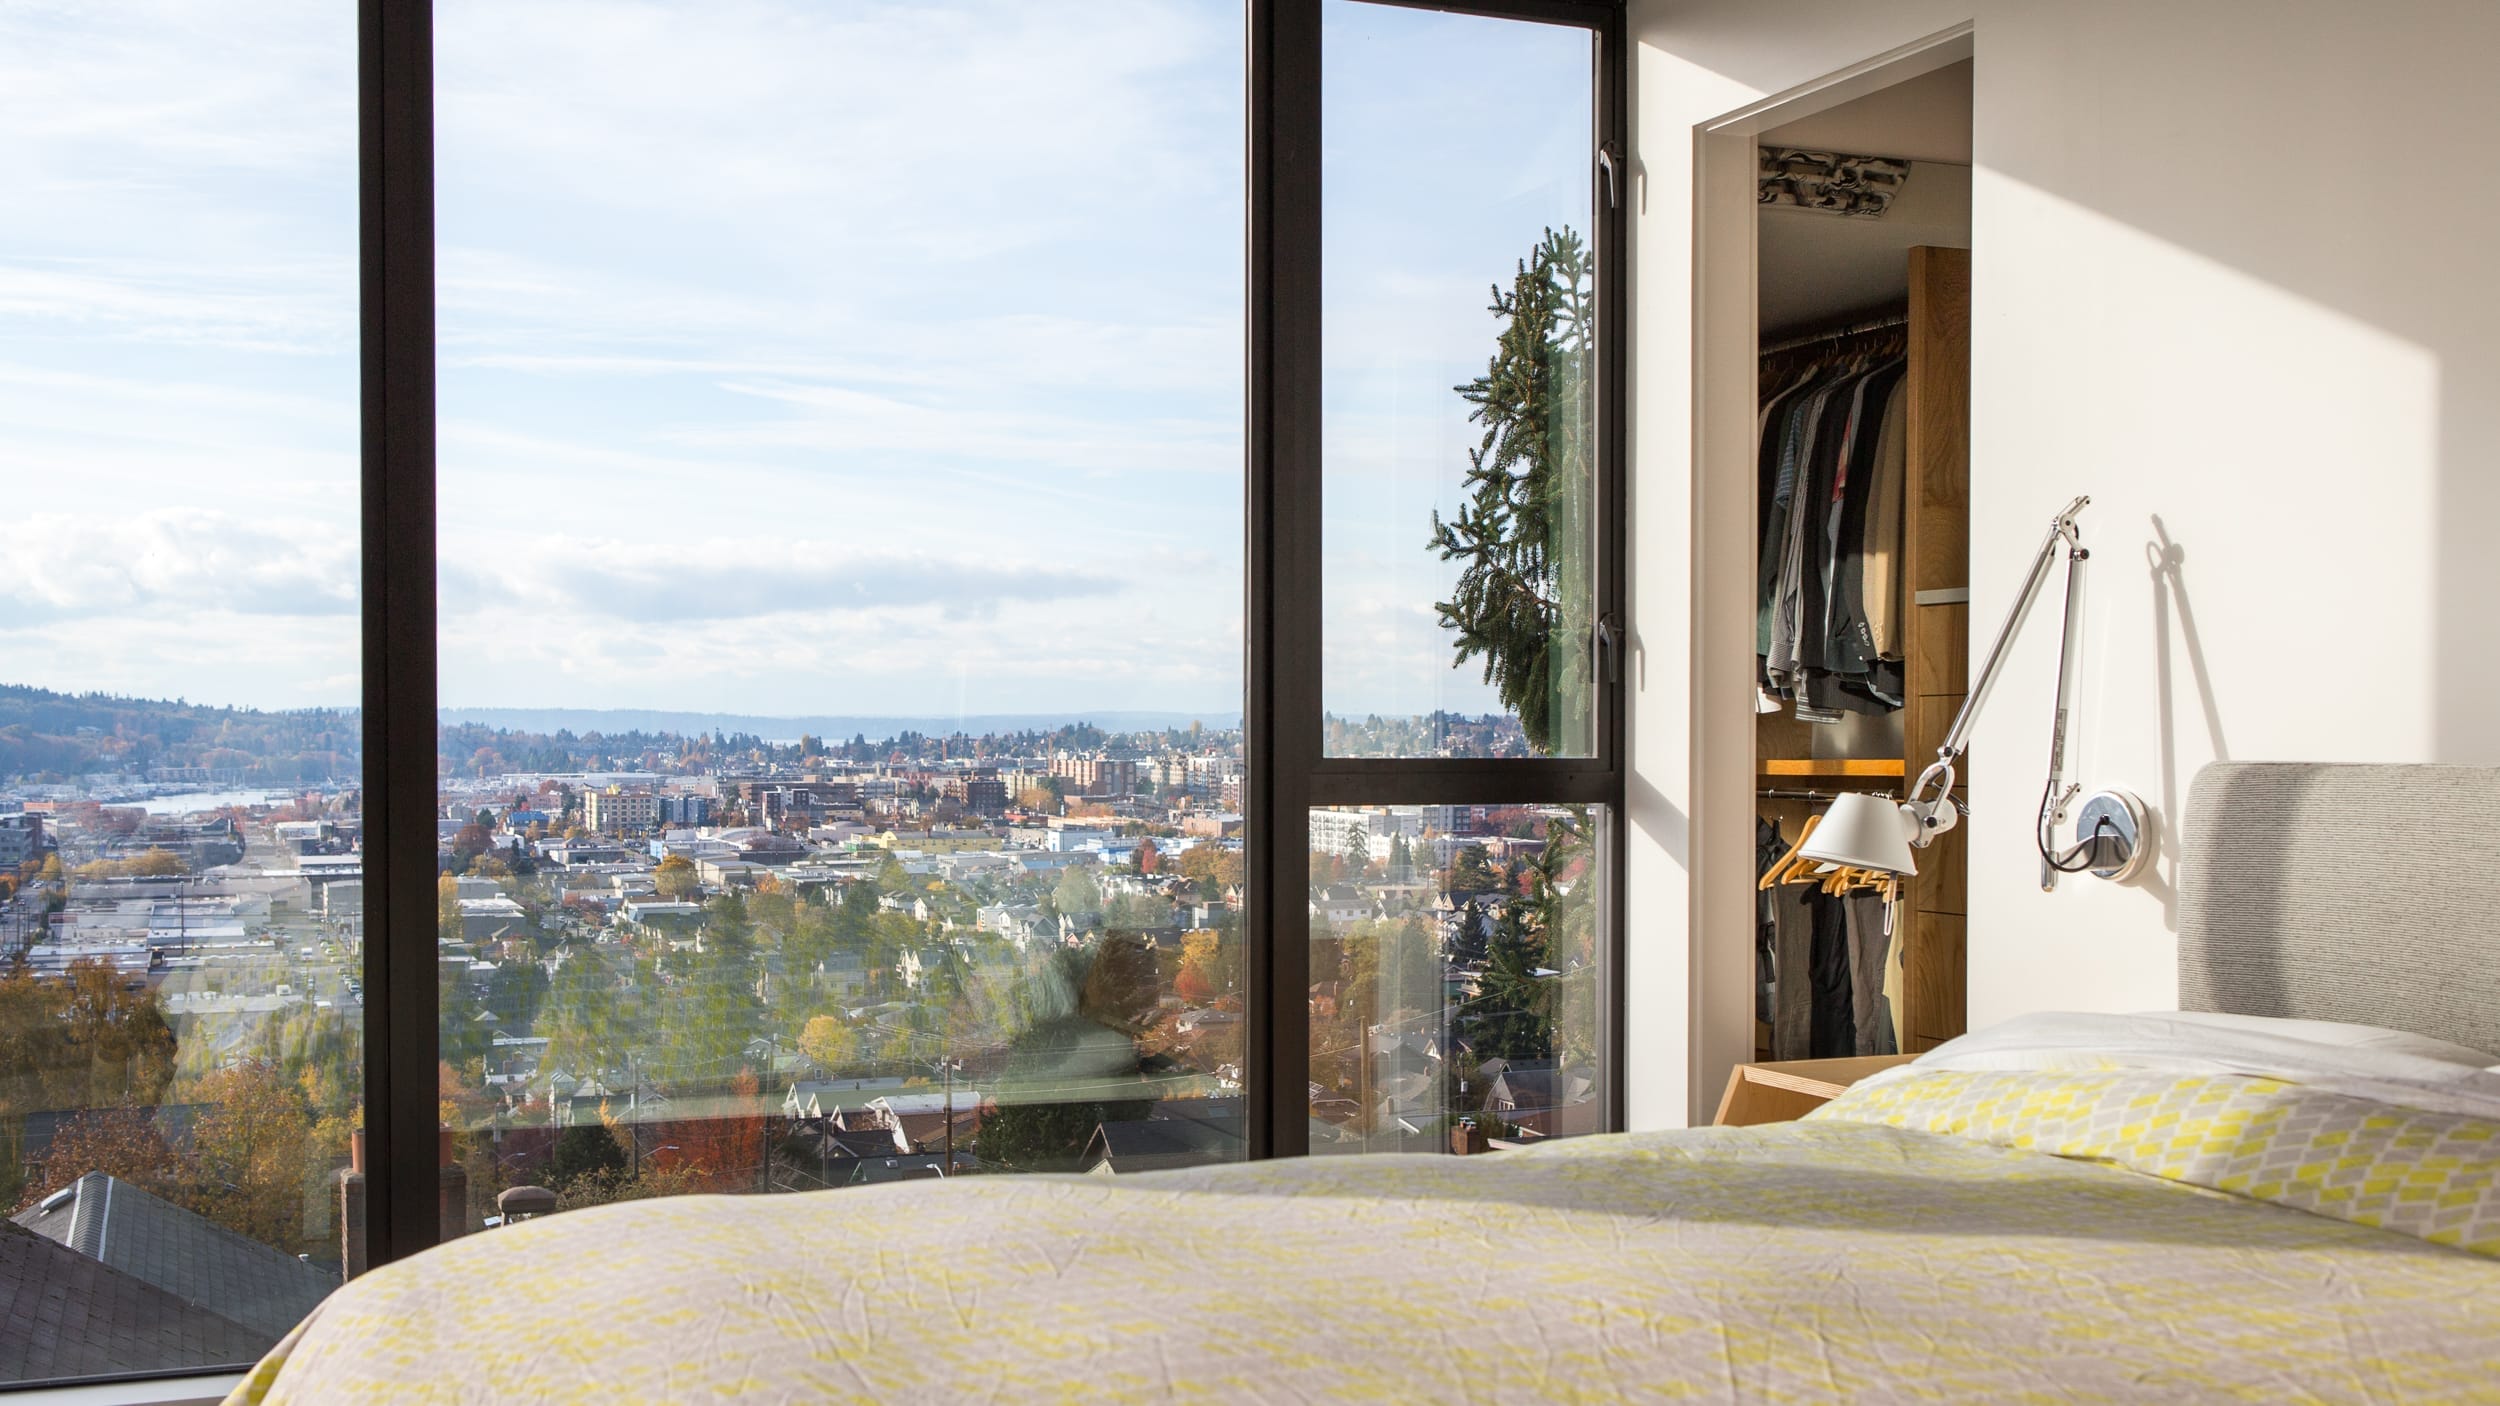 A bed in a bedroom with a view of a city.